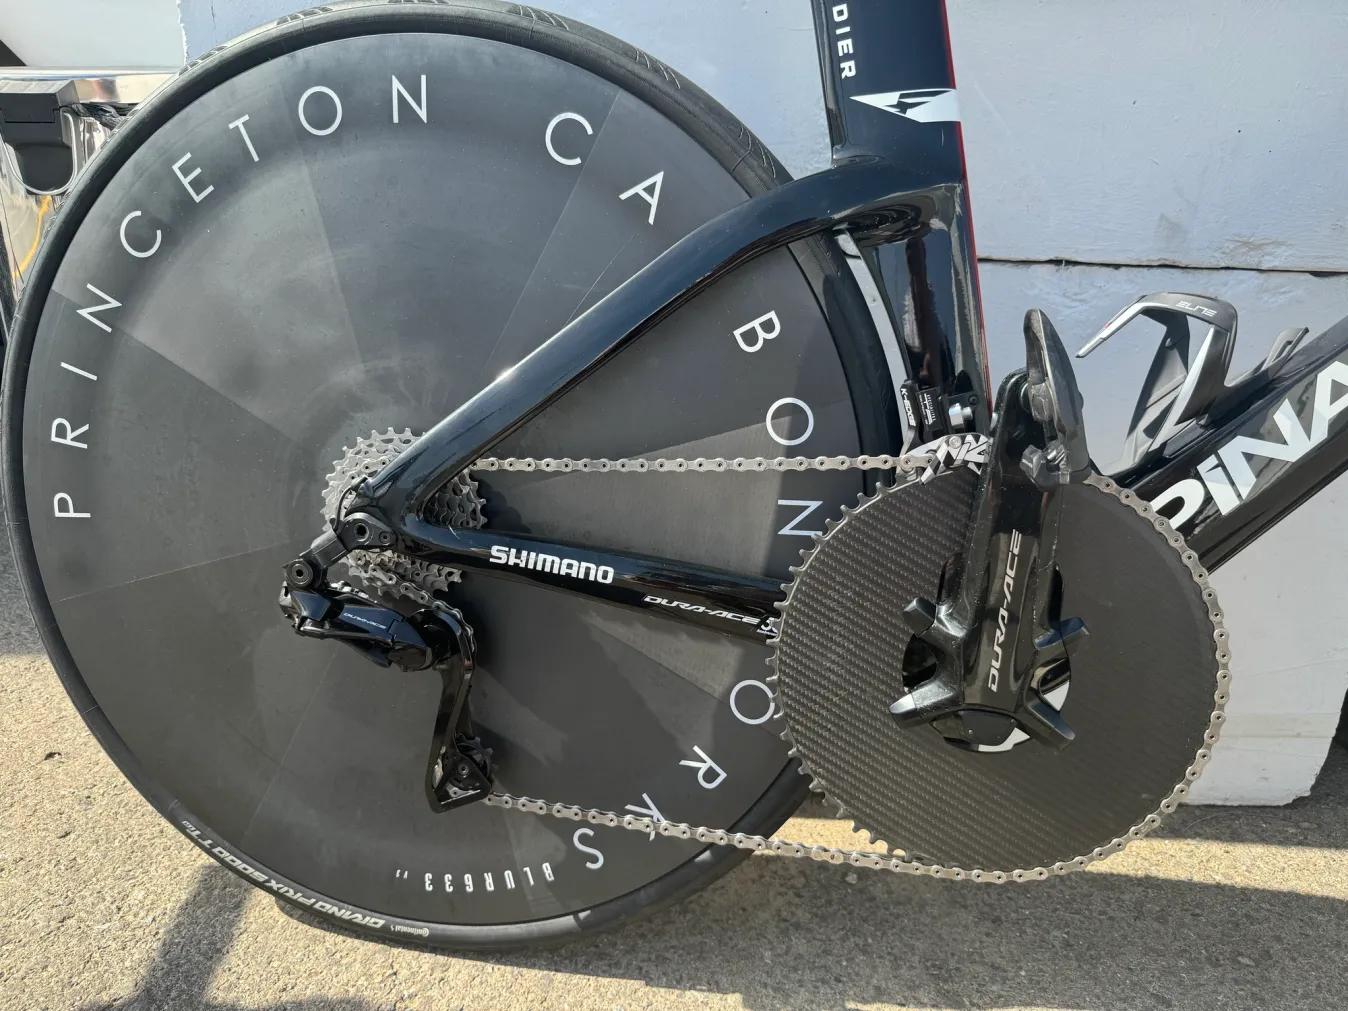 Big chainrings are not directly for faster gears